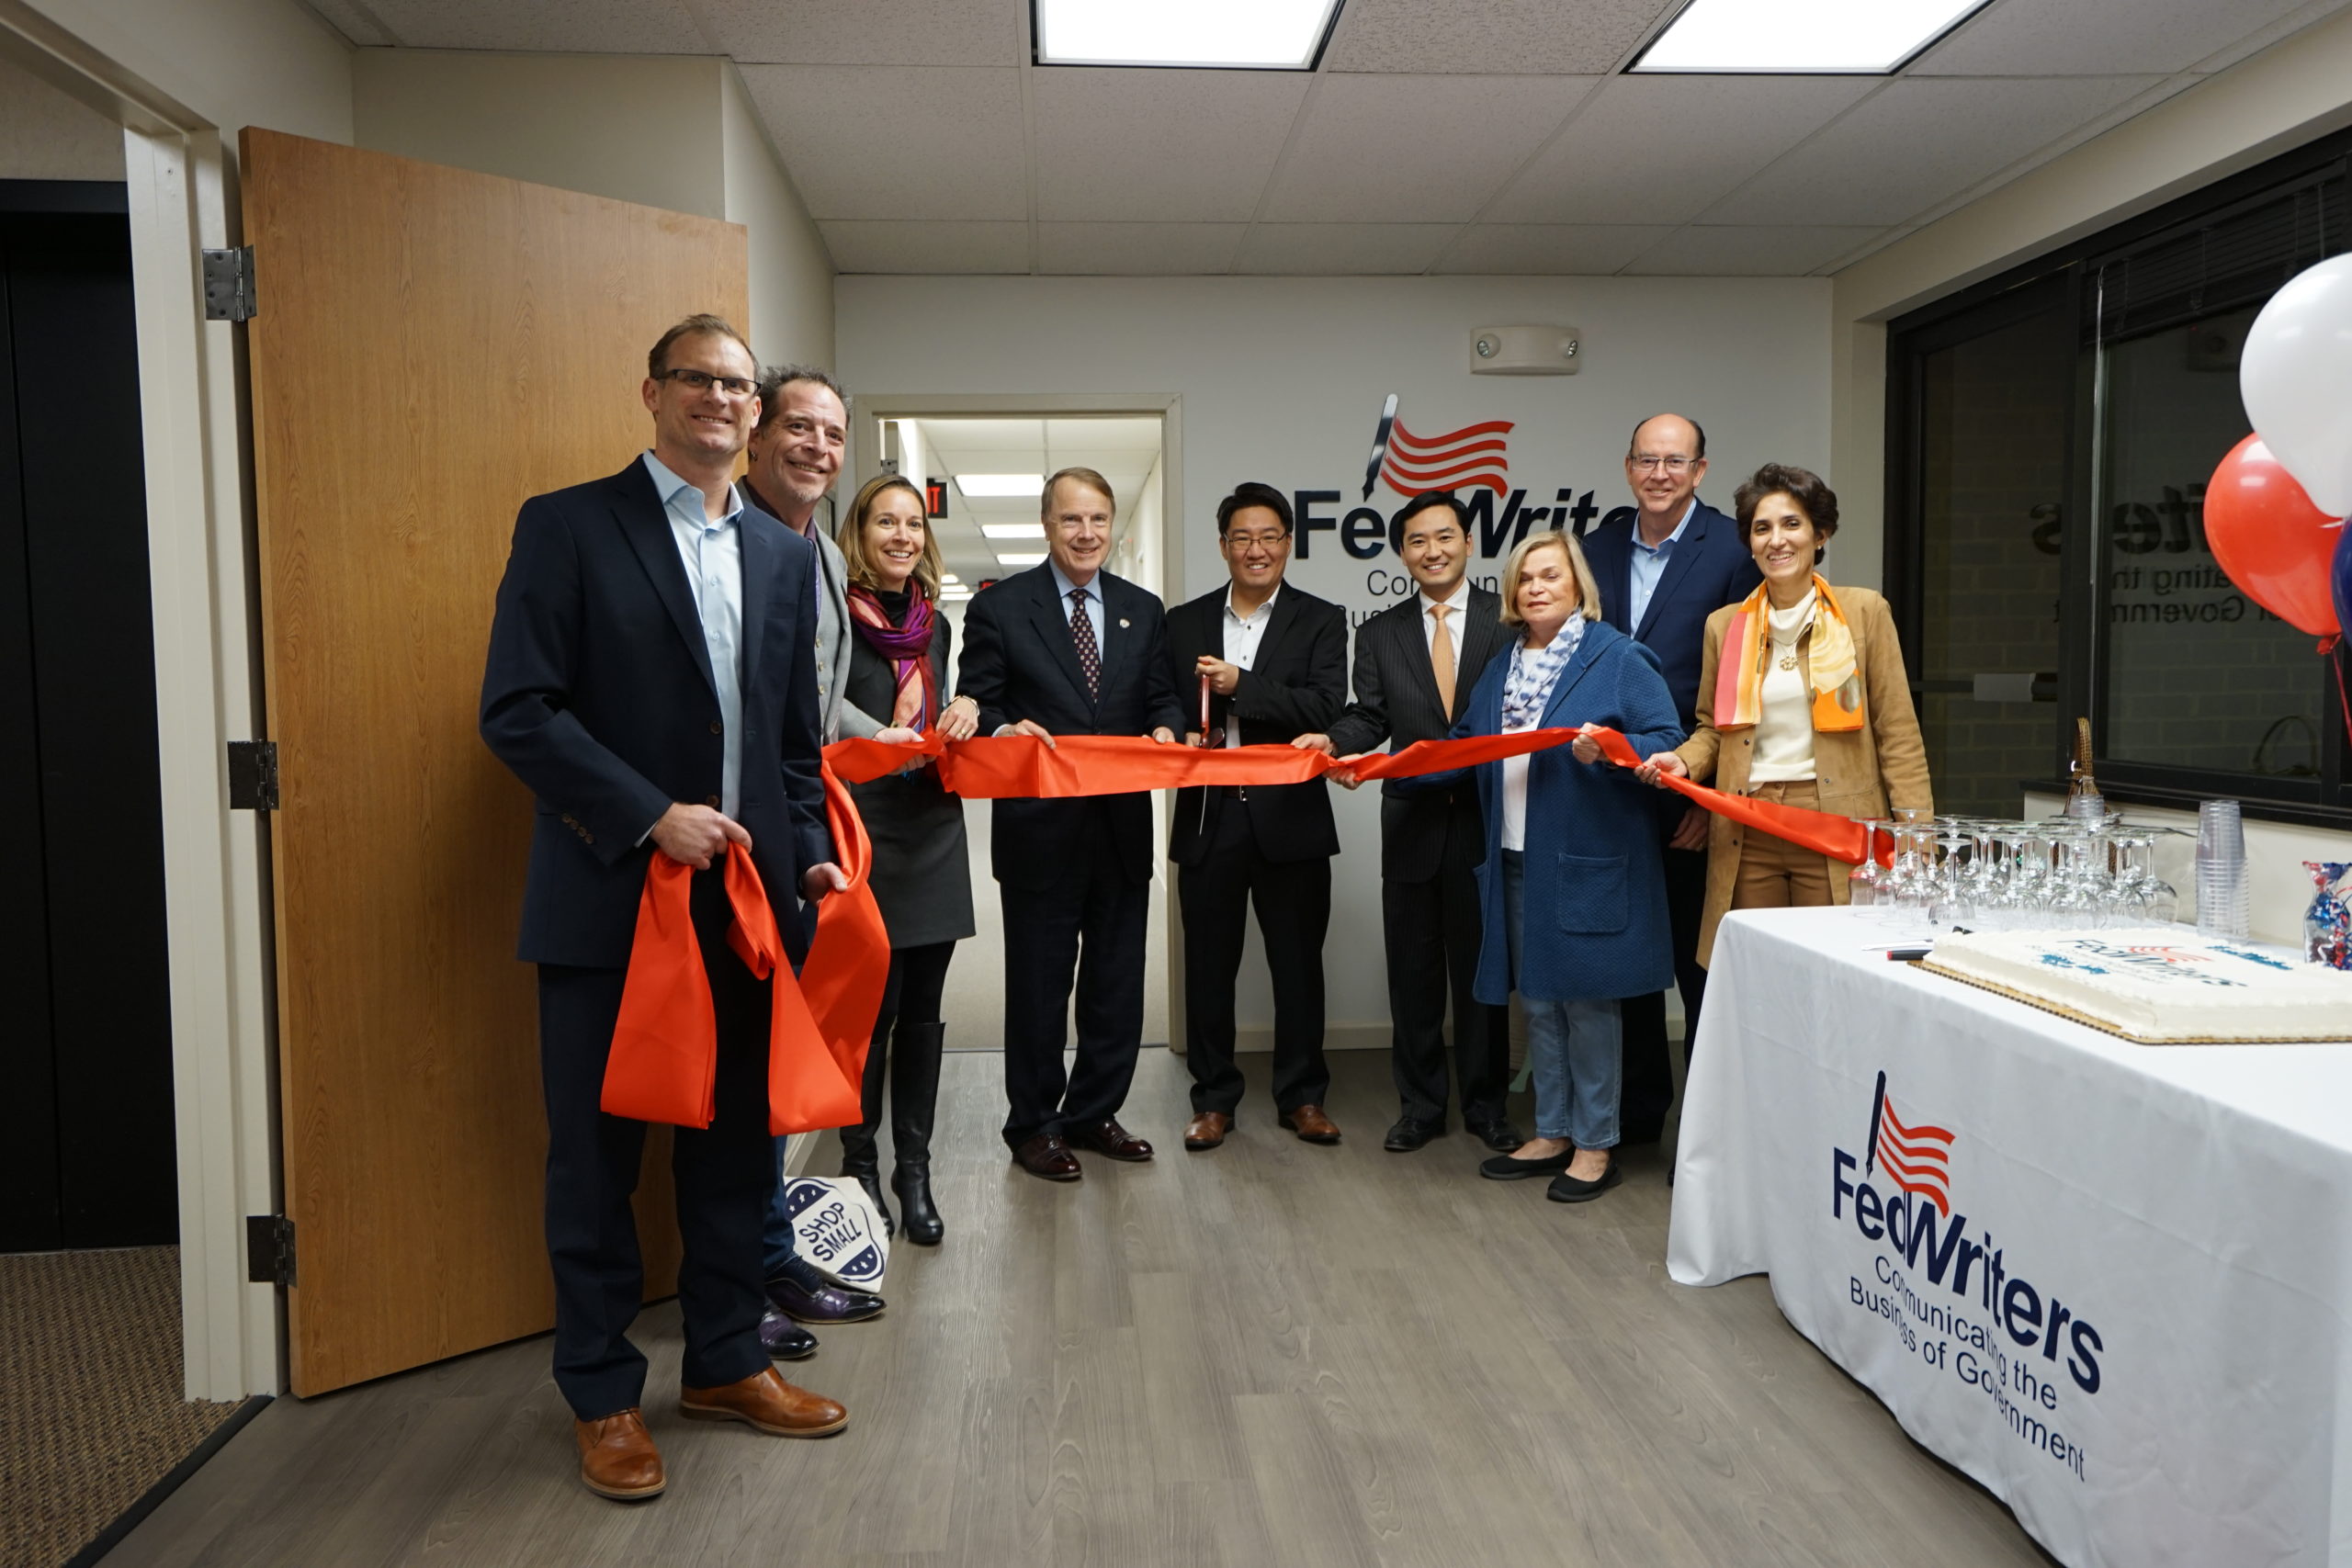 Ribbon cutting ceremony for FedWriters' headquarters, attended by FedWriters leadership and the Fairfax Economic Group.